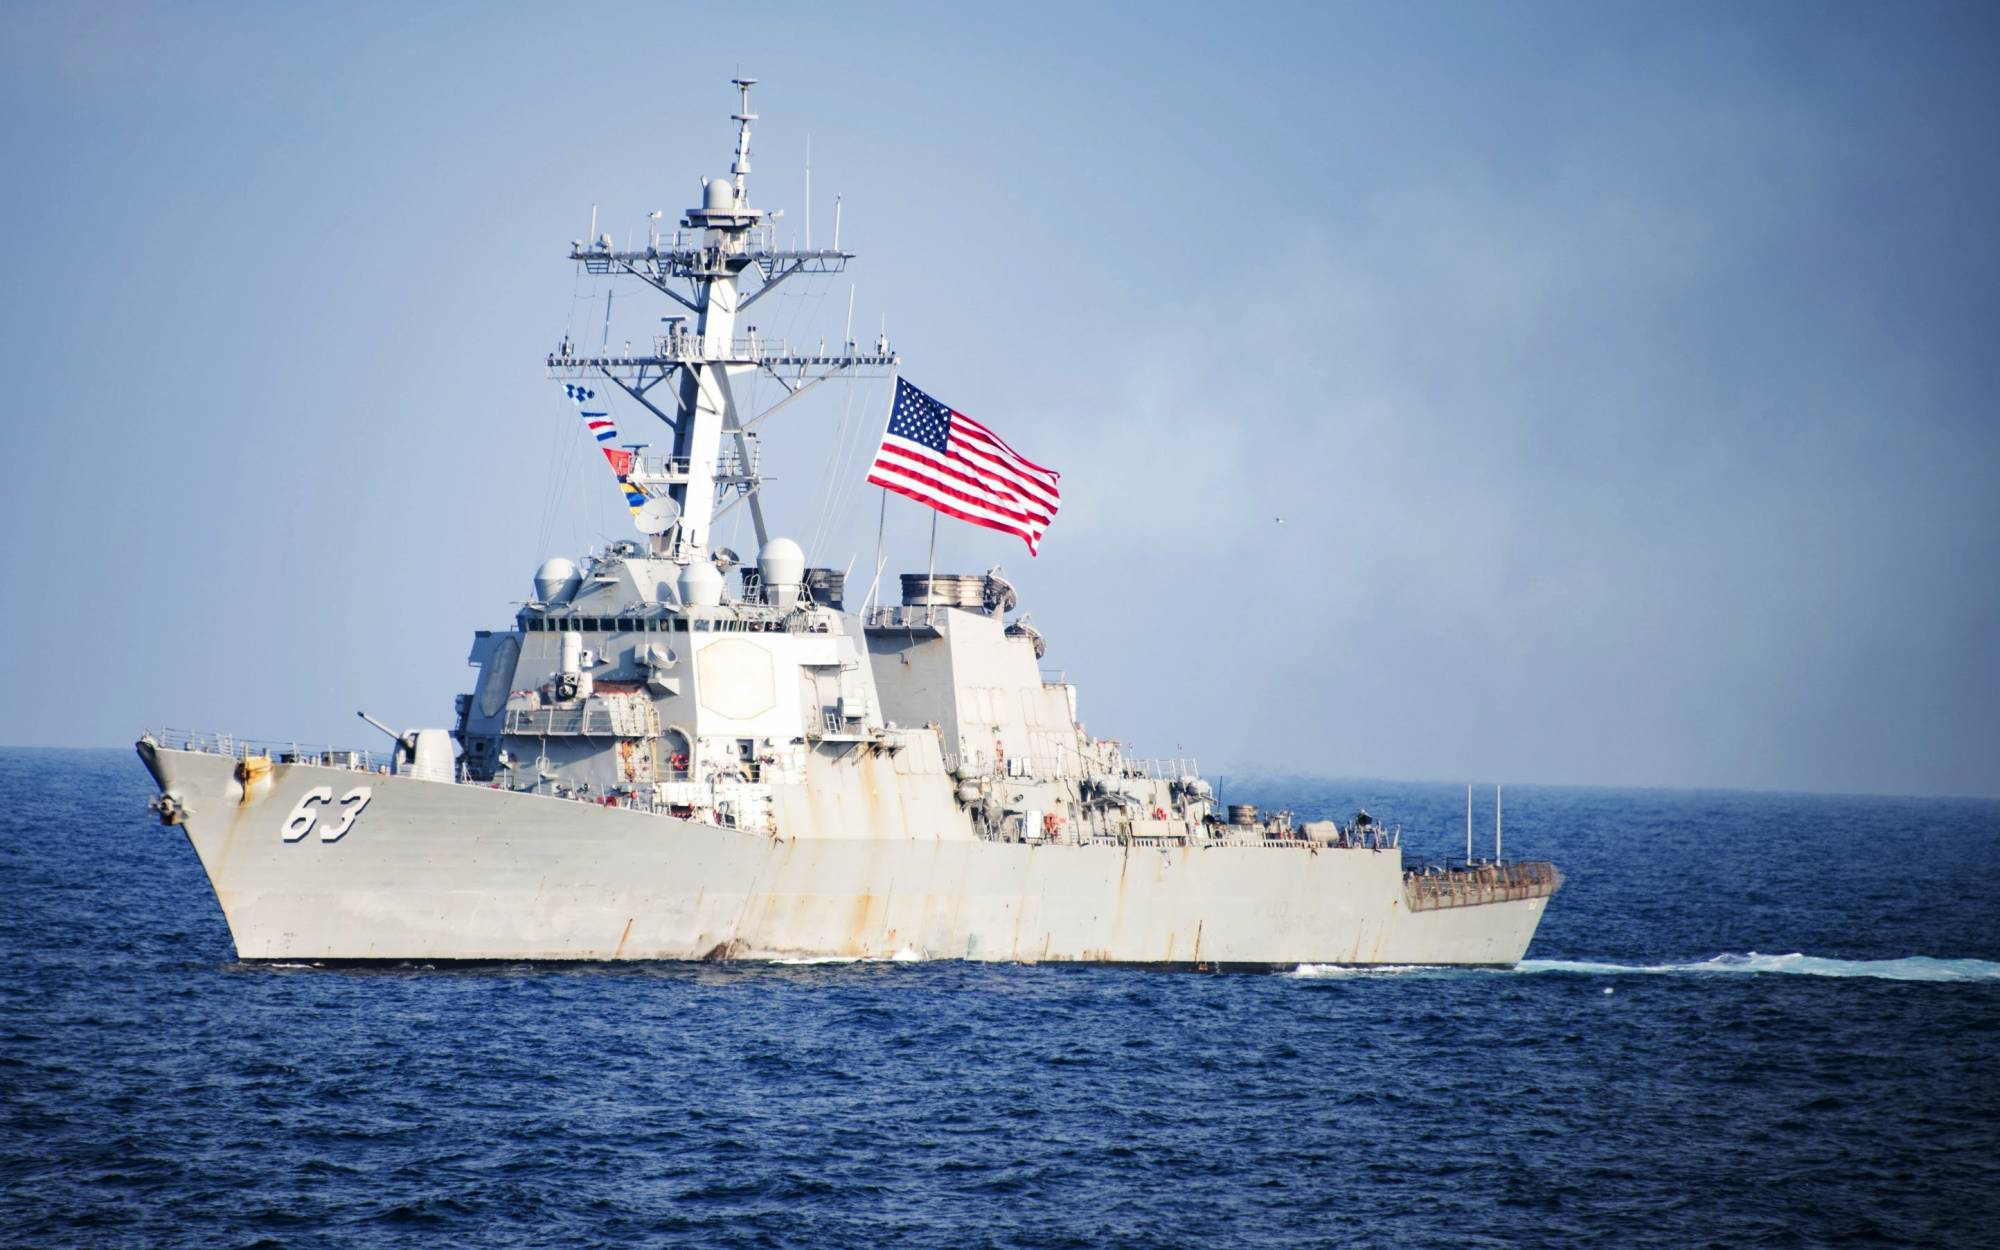 In this March 22, 2017, photo provided by U.S. Navy, U.S. Navy destroyer USS Stethem transits waters east of the Korean Peninsula during a photo exercise including the U.S. Navy and South Korean Navy during the Operation Foal Eagle. China’s foreign ministry is strongly protesting the U.S. Navy destroyer USS Stethem’s sailing within 12 nautical miles (22 kilometers) of tiny Triton island that is claimed by China, Taiwan and Vietnam.
Spokesman Lu Kang said China dispatched naval ships and fighter planes Sunday, July 2, 2017 to “warn off the U.S. vessel.” The U.S. Pacific Fleet had no comment on China's statement or specifics about the Stethem's operations. (Mass Communication Specialist 3rd Class Kurtis A. Hatcher/U.S. Navy via AP)